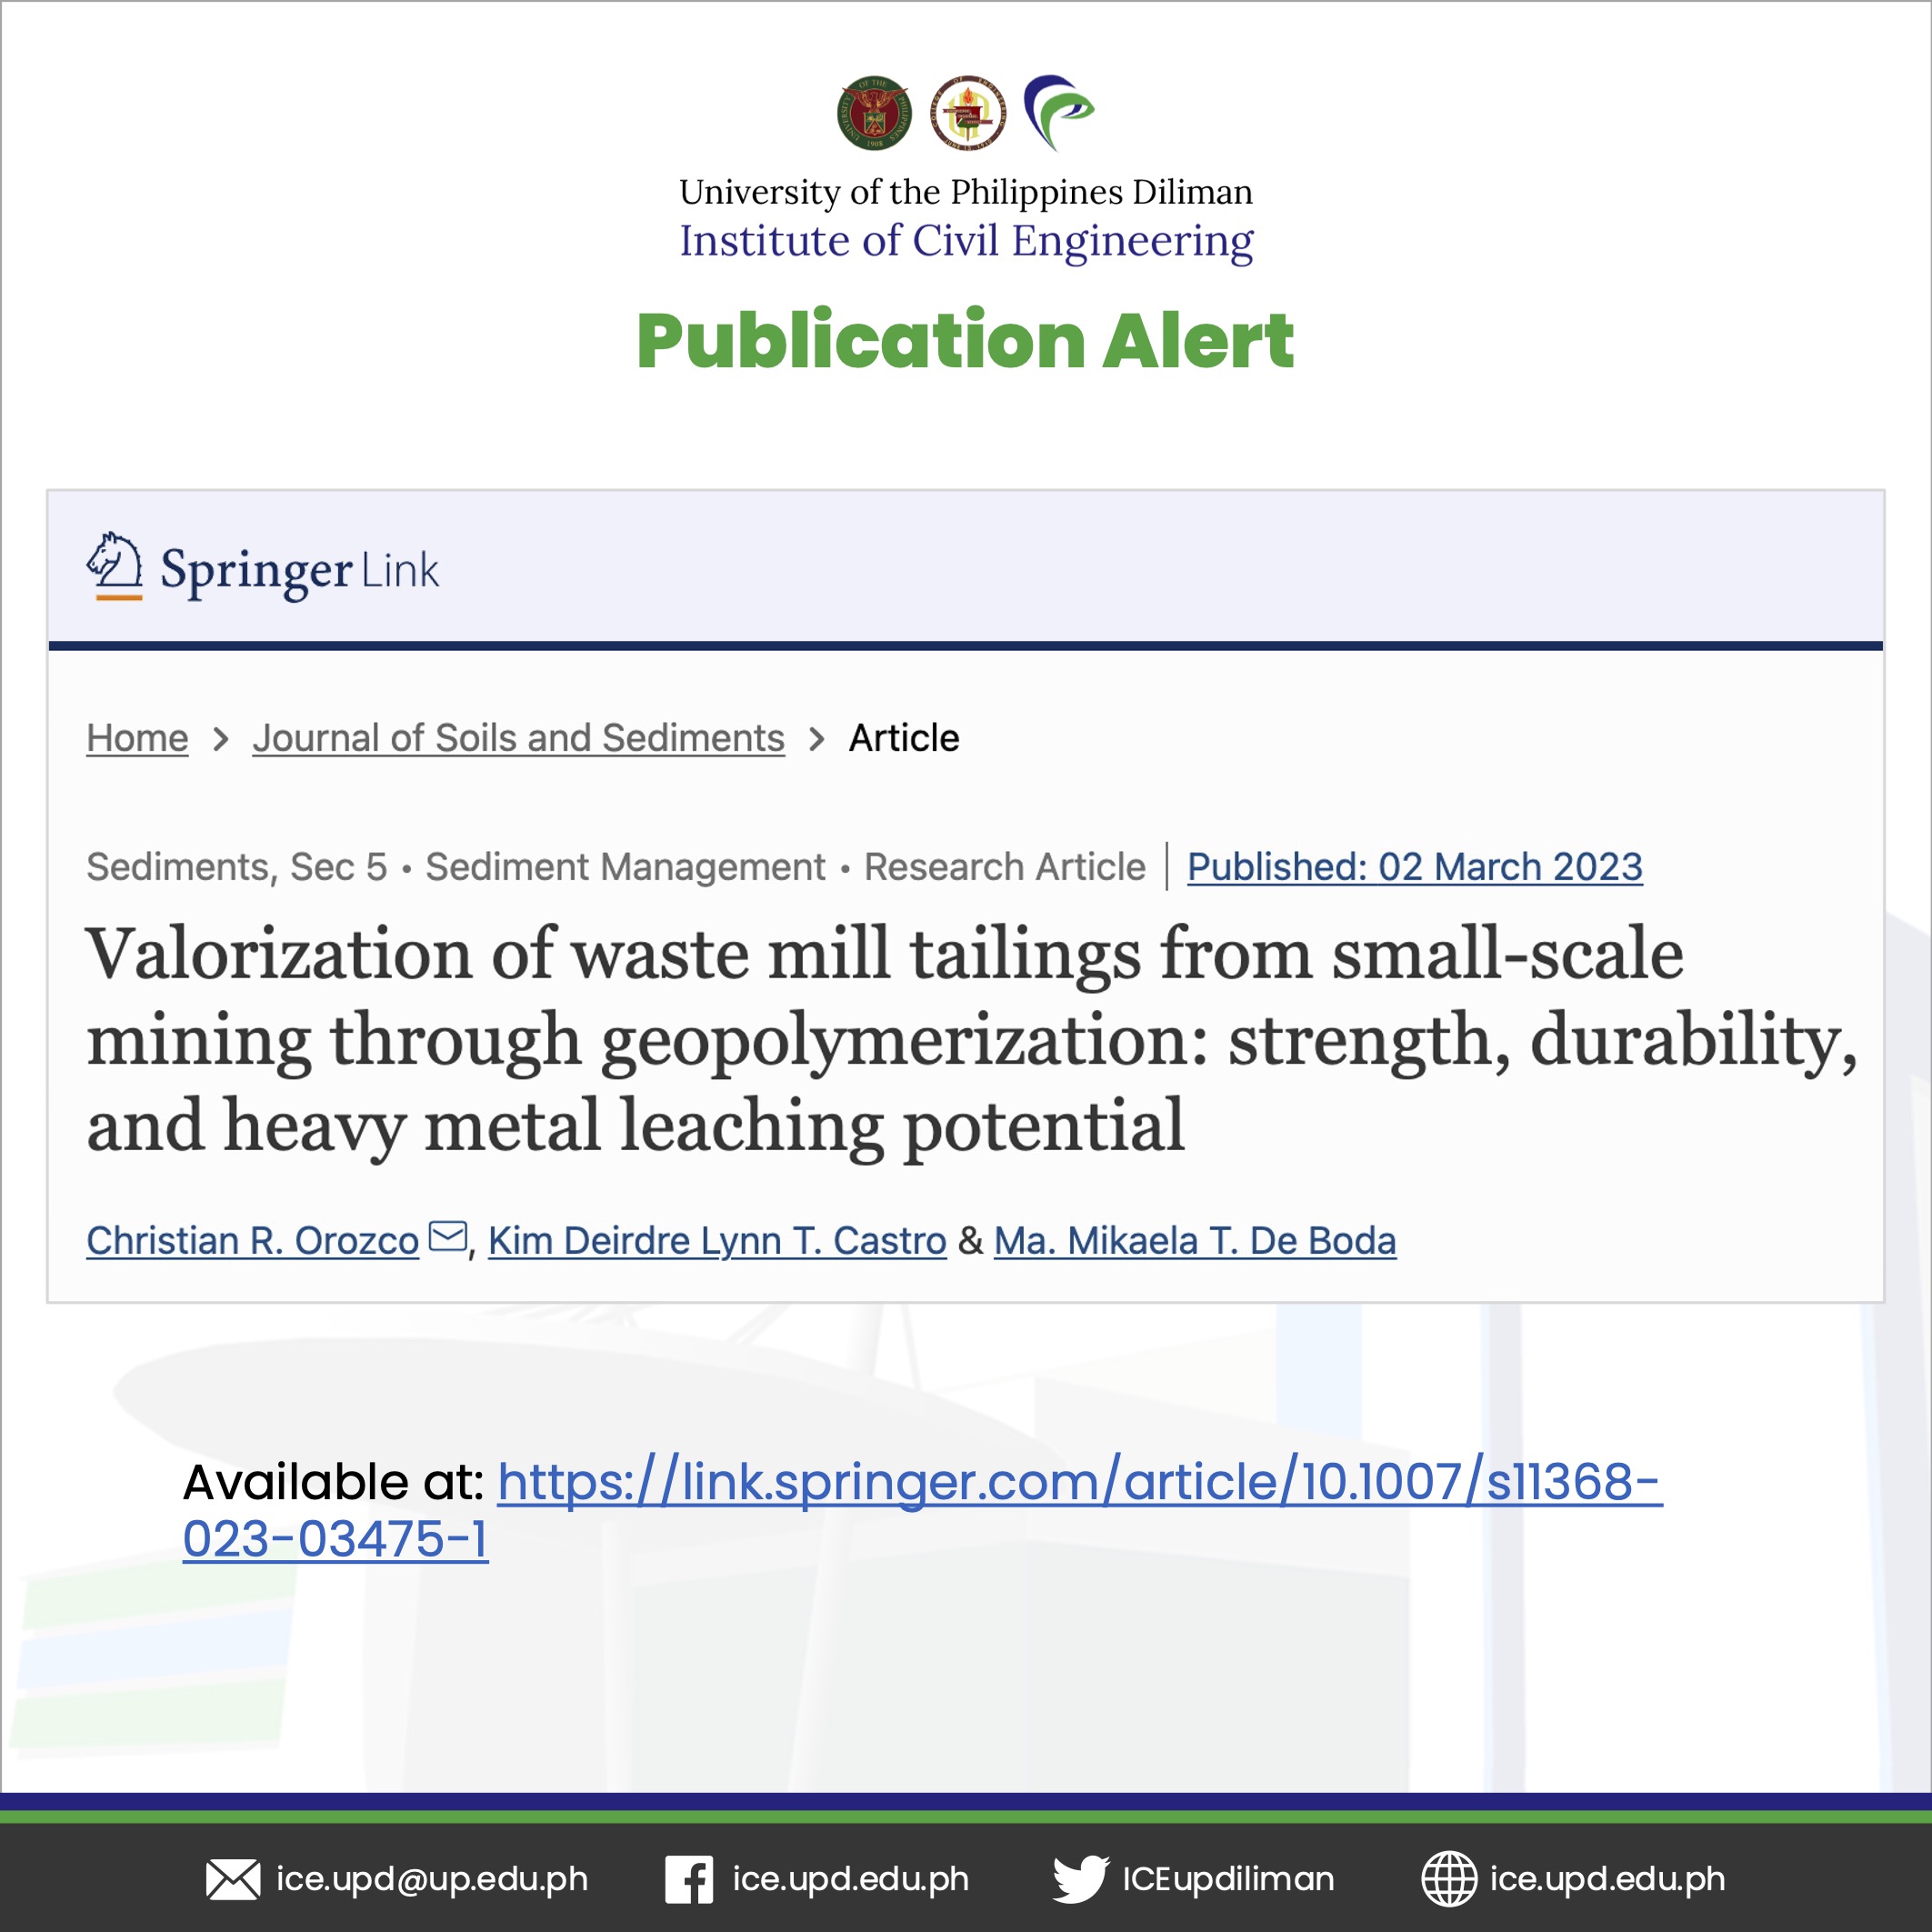 Publication Alert: Valorization of waste mill tailings from small-scale mining through geopolymerization: strength, durability, and heavy metal leaching potential